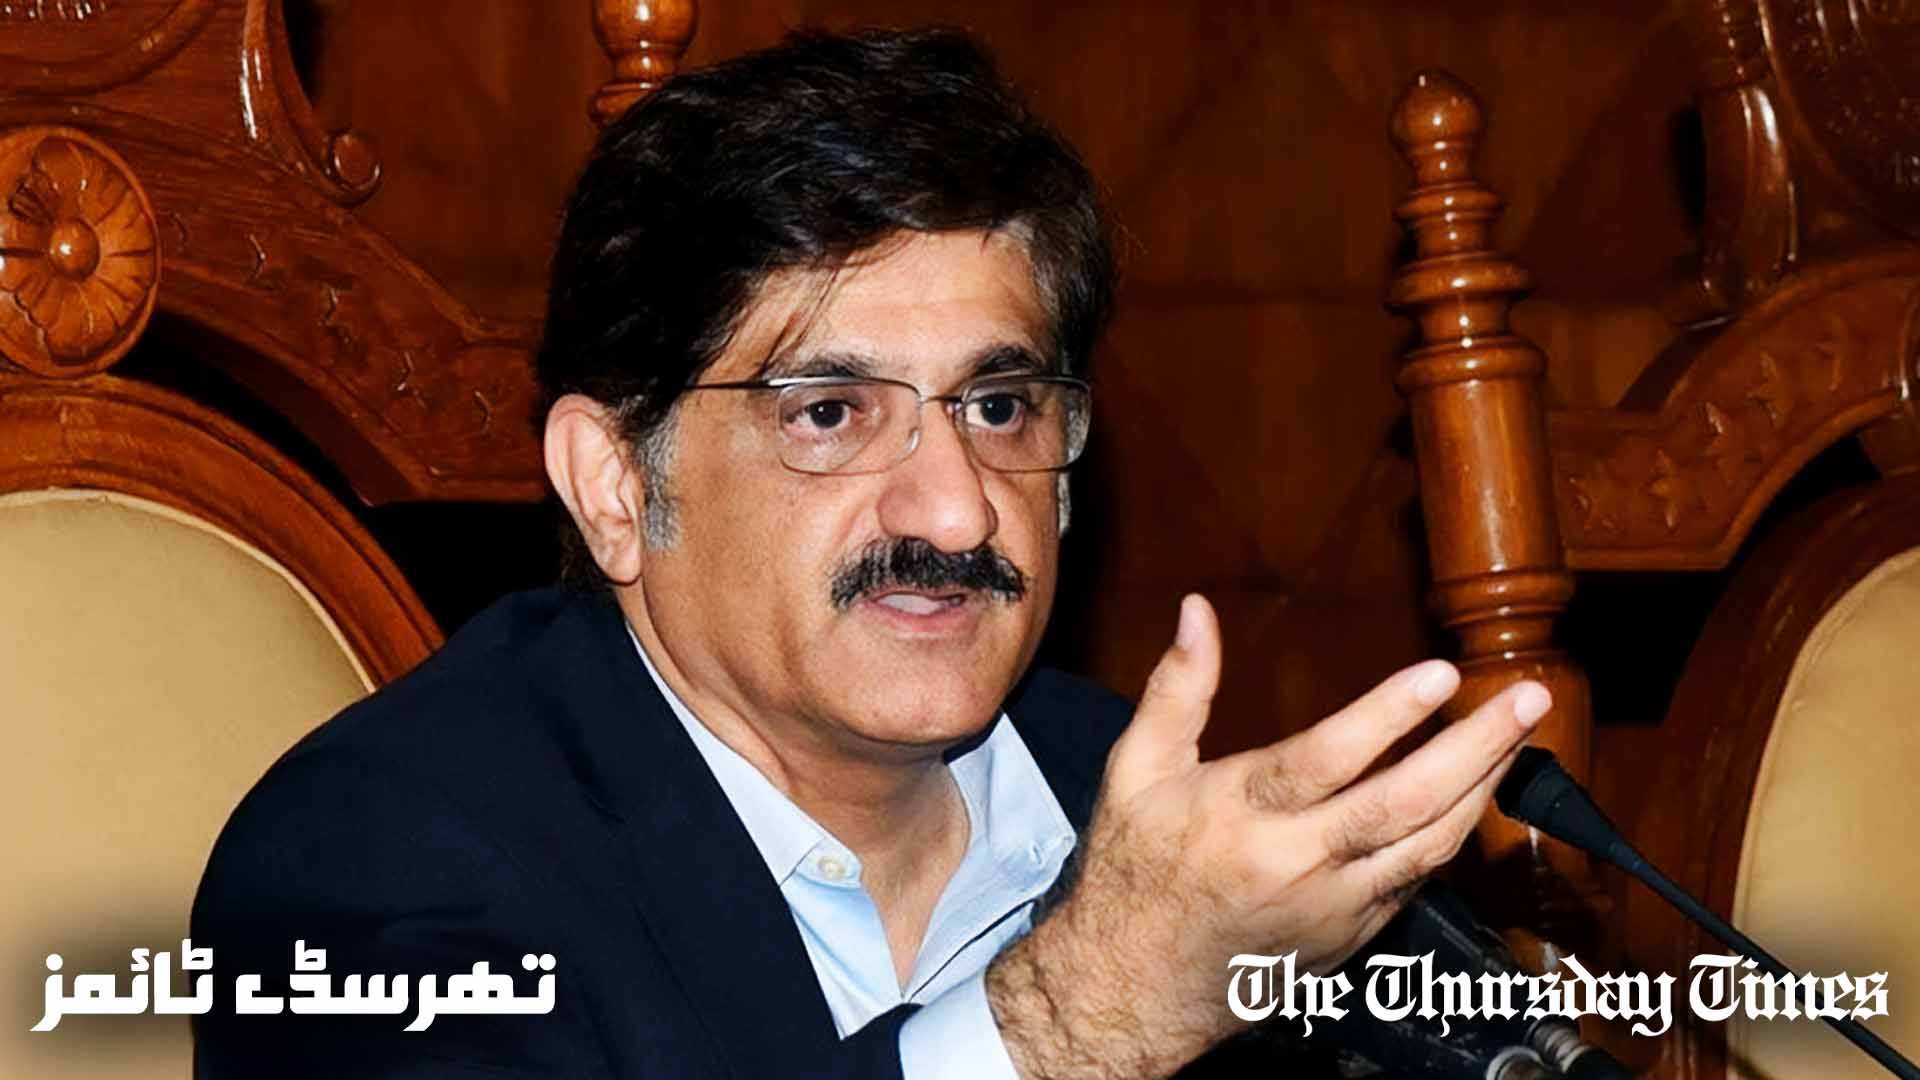 A file photo is shown of former Chief Minister of Sindh Murad Ali Shah. — FILE/THE THURSDAY TIMES